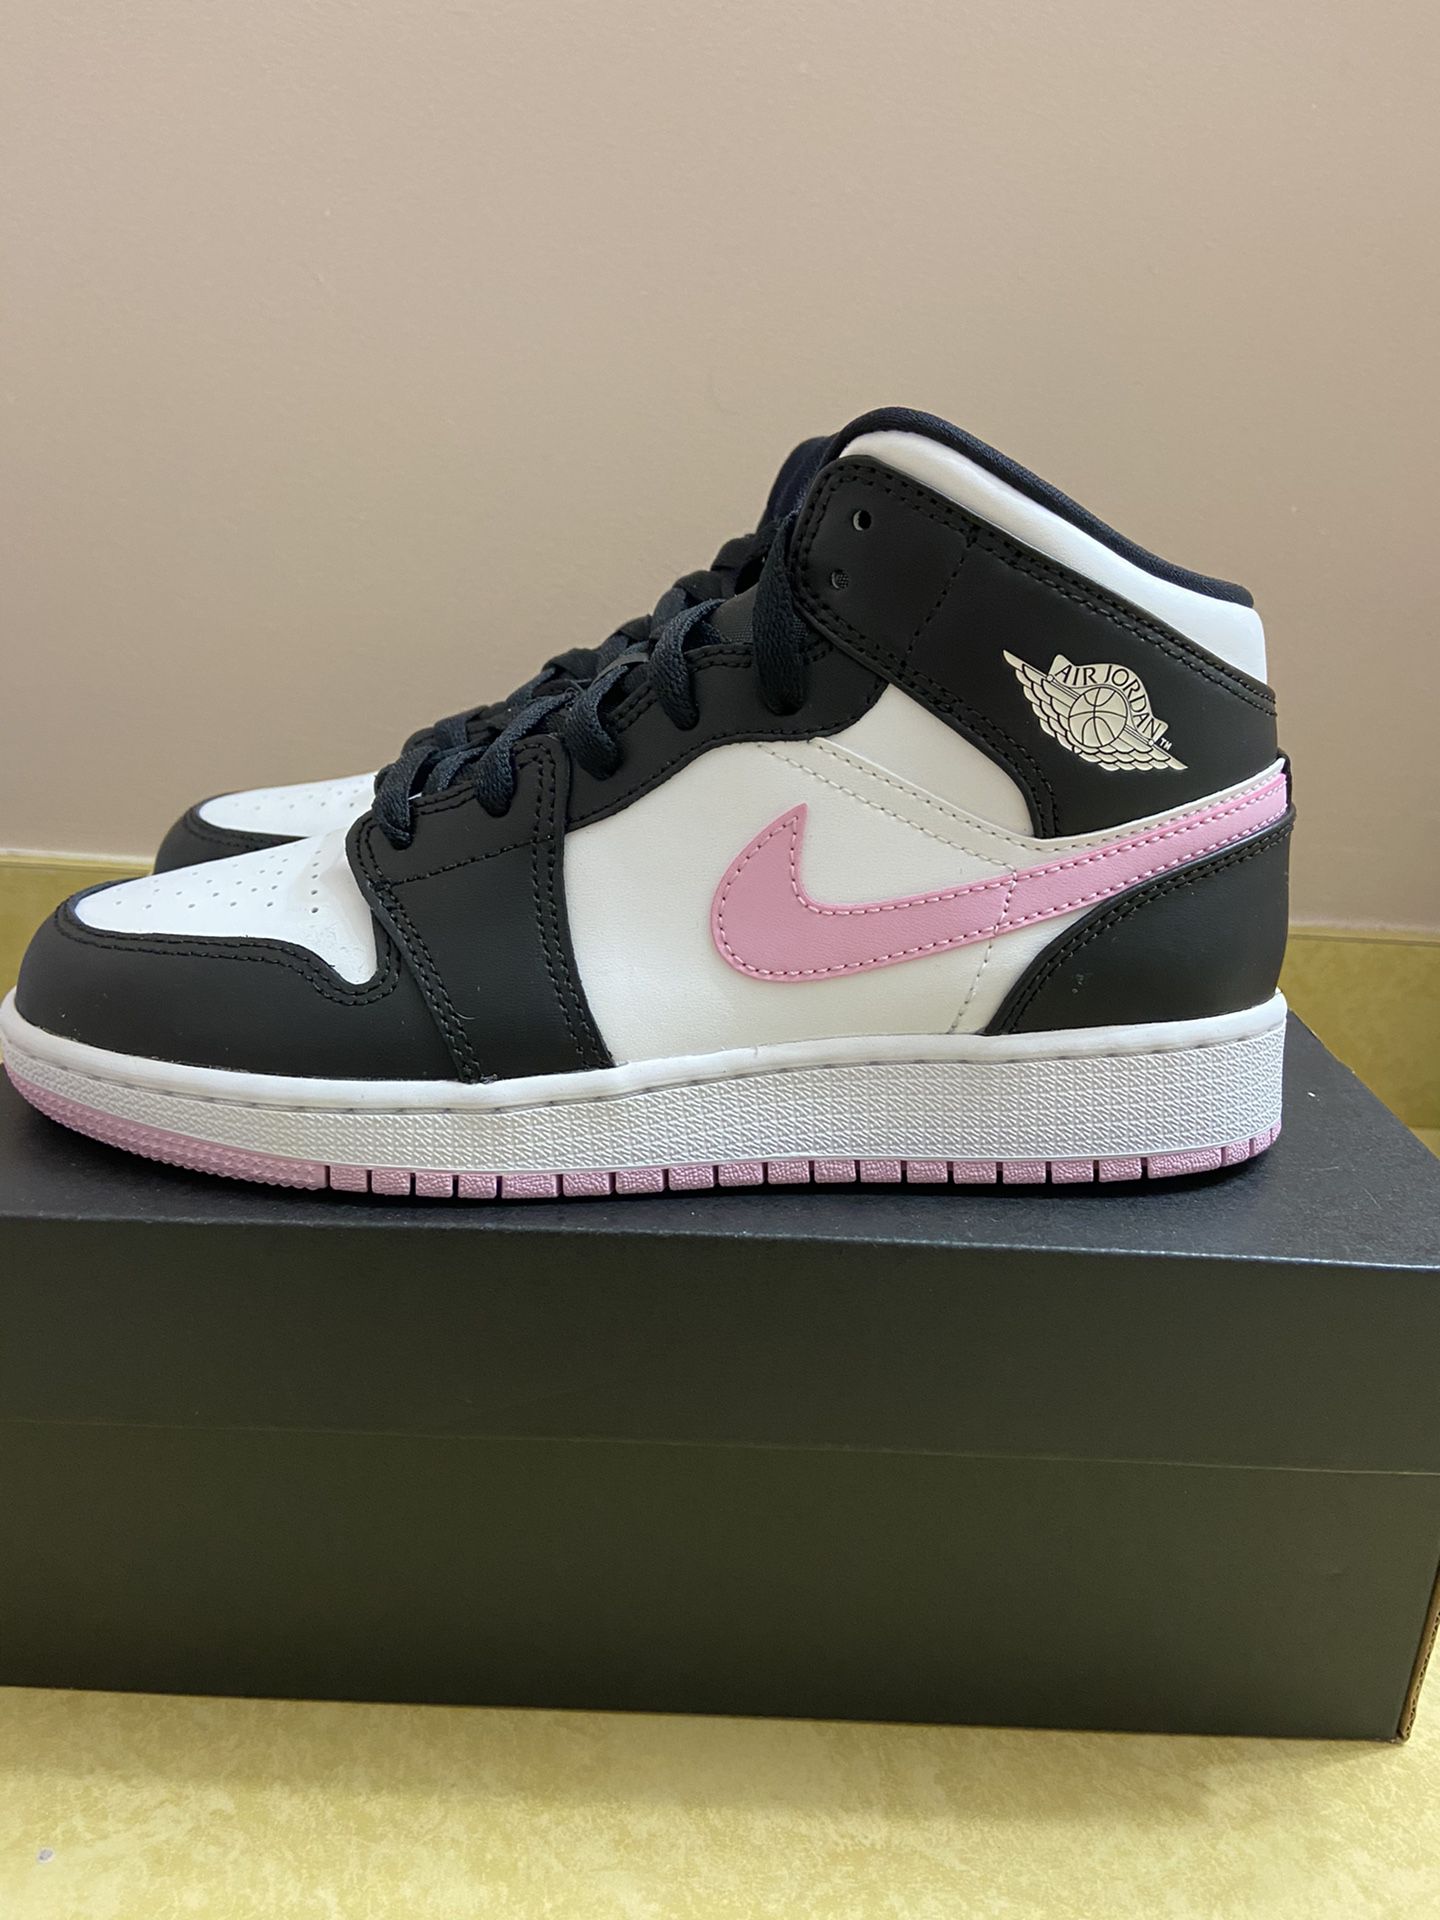 Air Jordan 1 Mid GS White Light Arctic Pink New Size 6Y